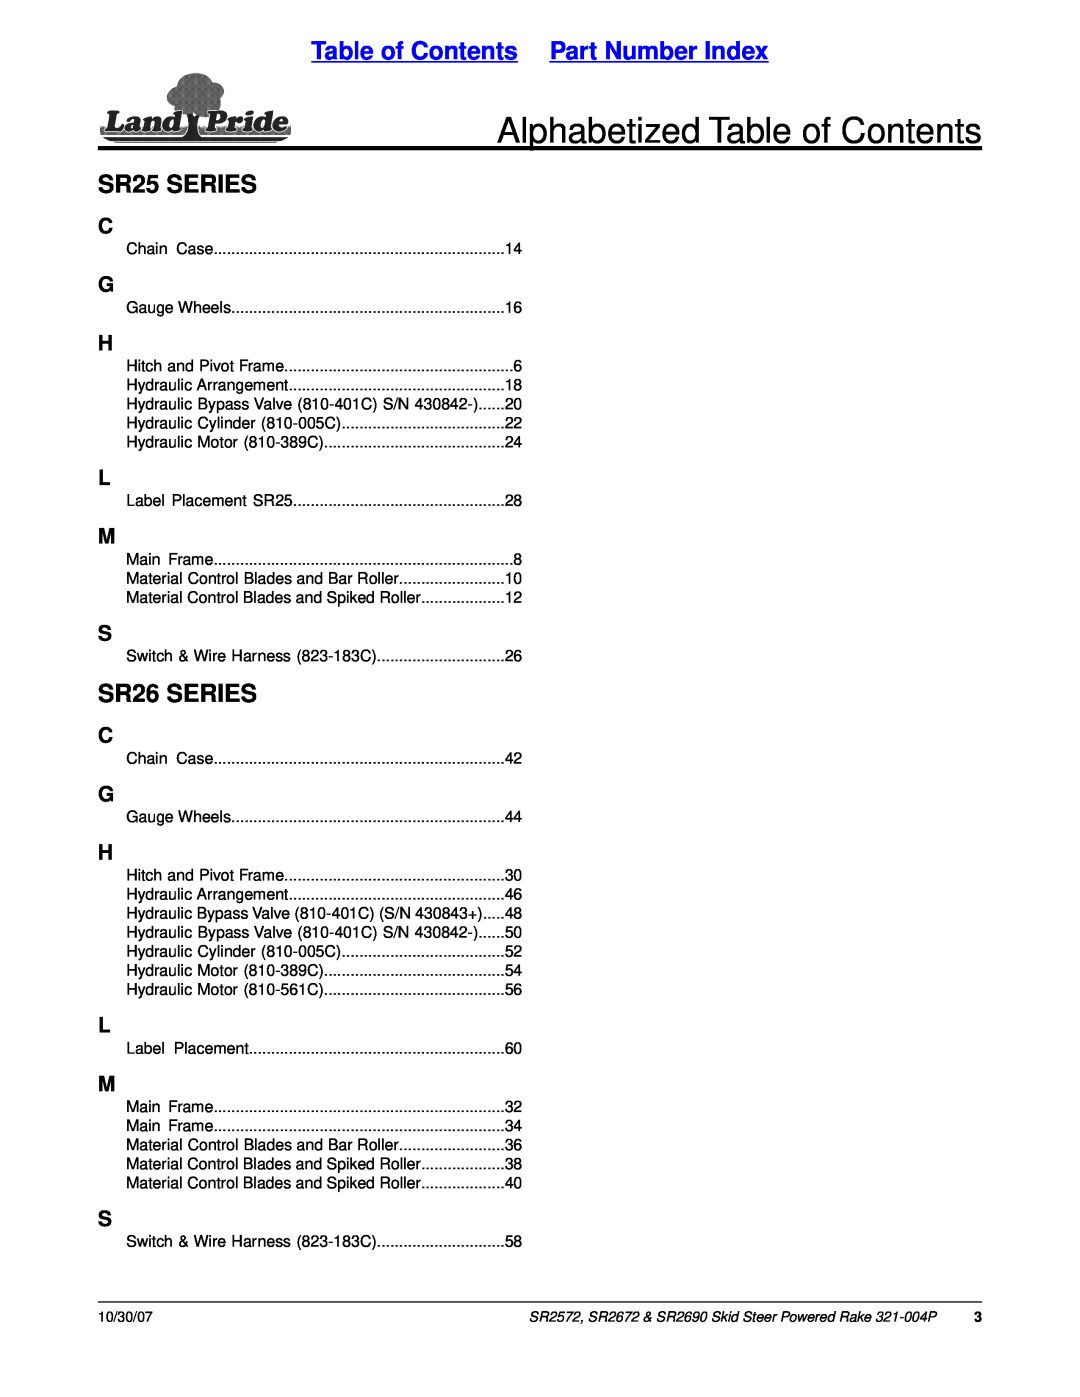 Land Pride SR2690, SR2672 Alphabetized Table of Contents, Table of Contents Part Number Index, SR25 SERIES, SR26 SERIES 